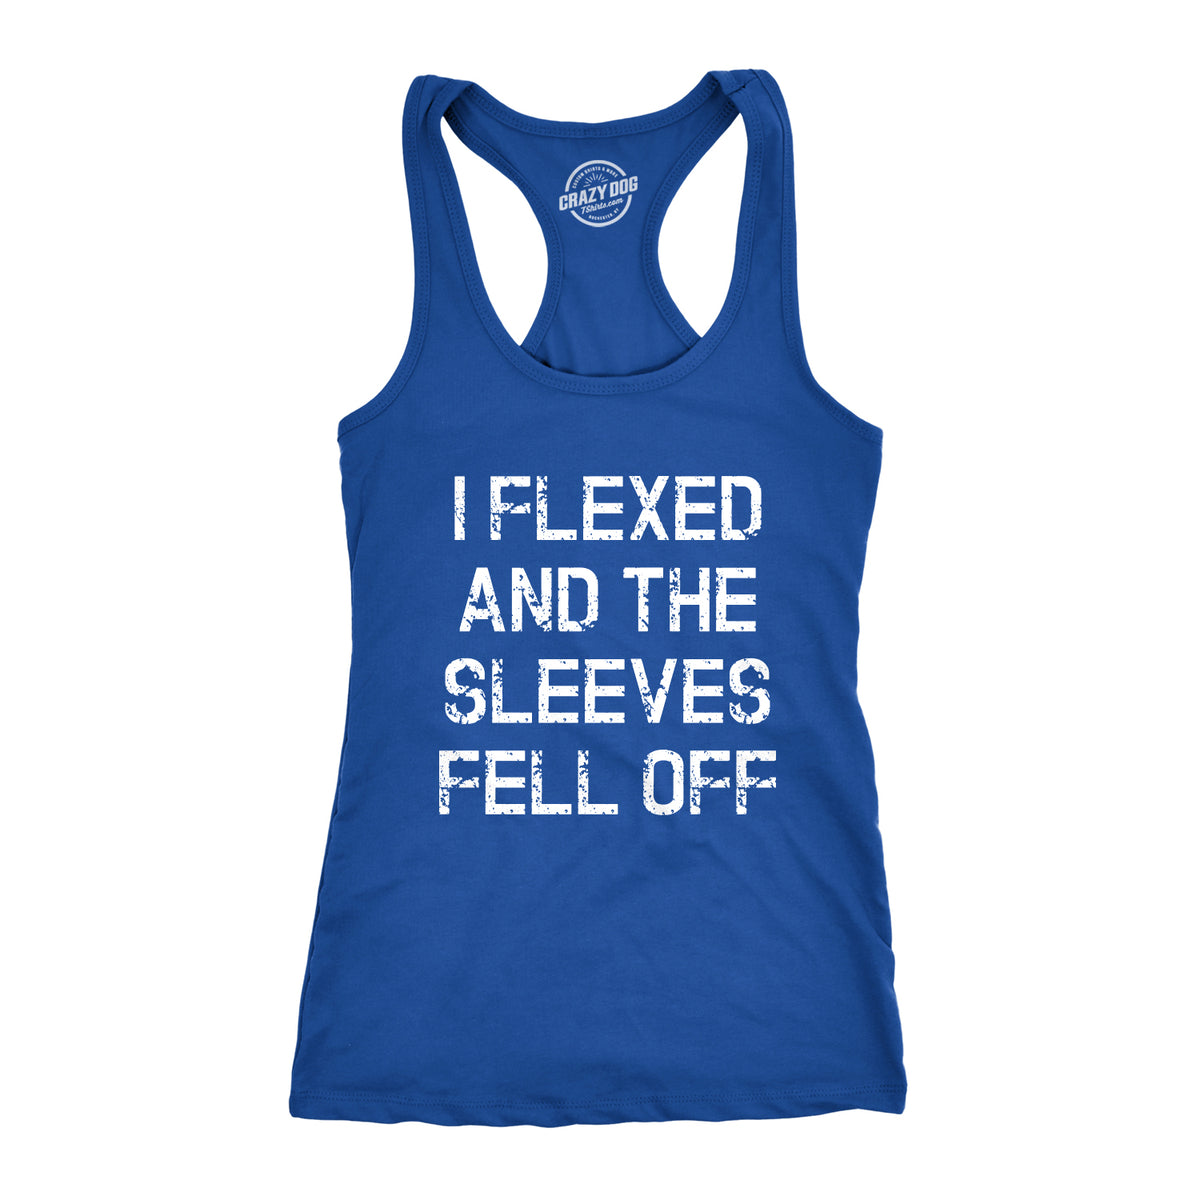 Funny Royal I Flexed And The Sleeves Fell Off Womens Tank Top Nerdy Fitness Tee